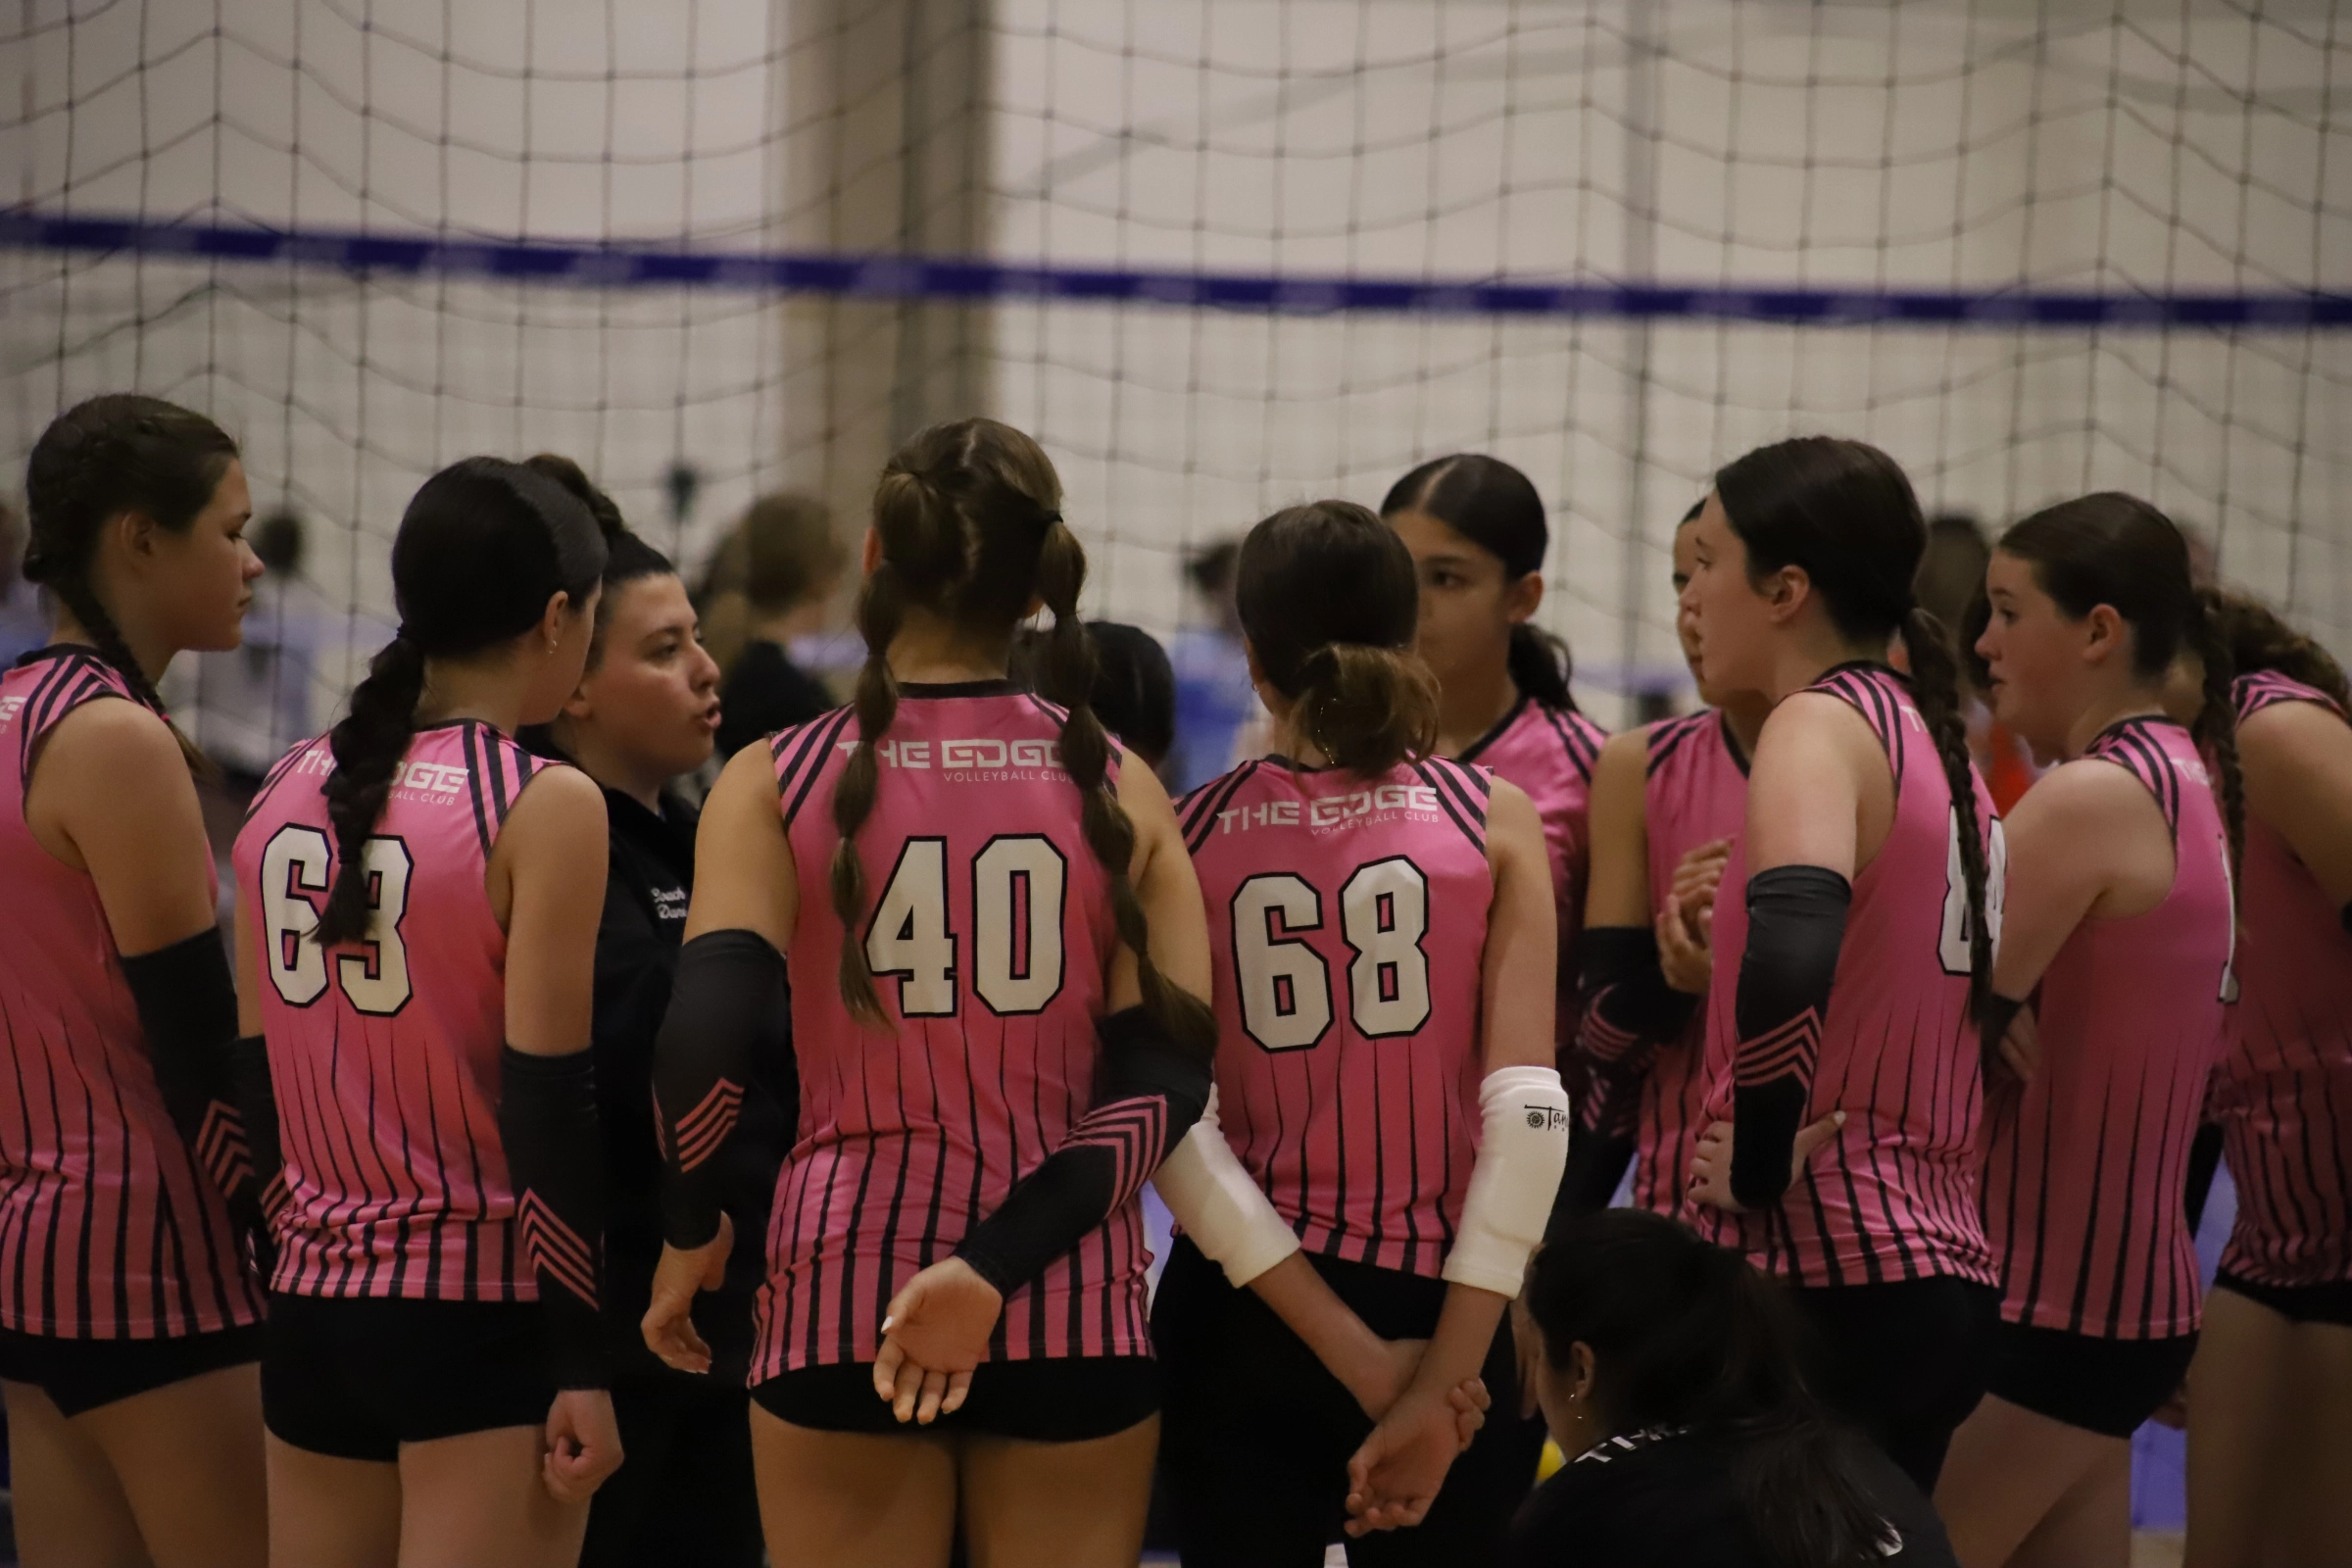 An Edge Volleyball Club team preparing for their upcoming game at a national qualifier tournament